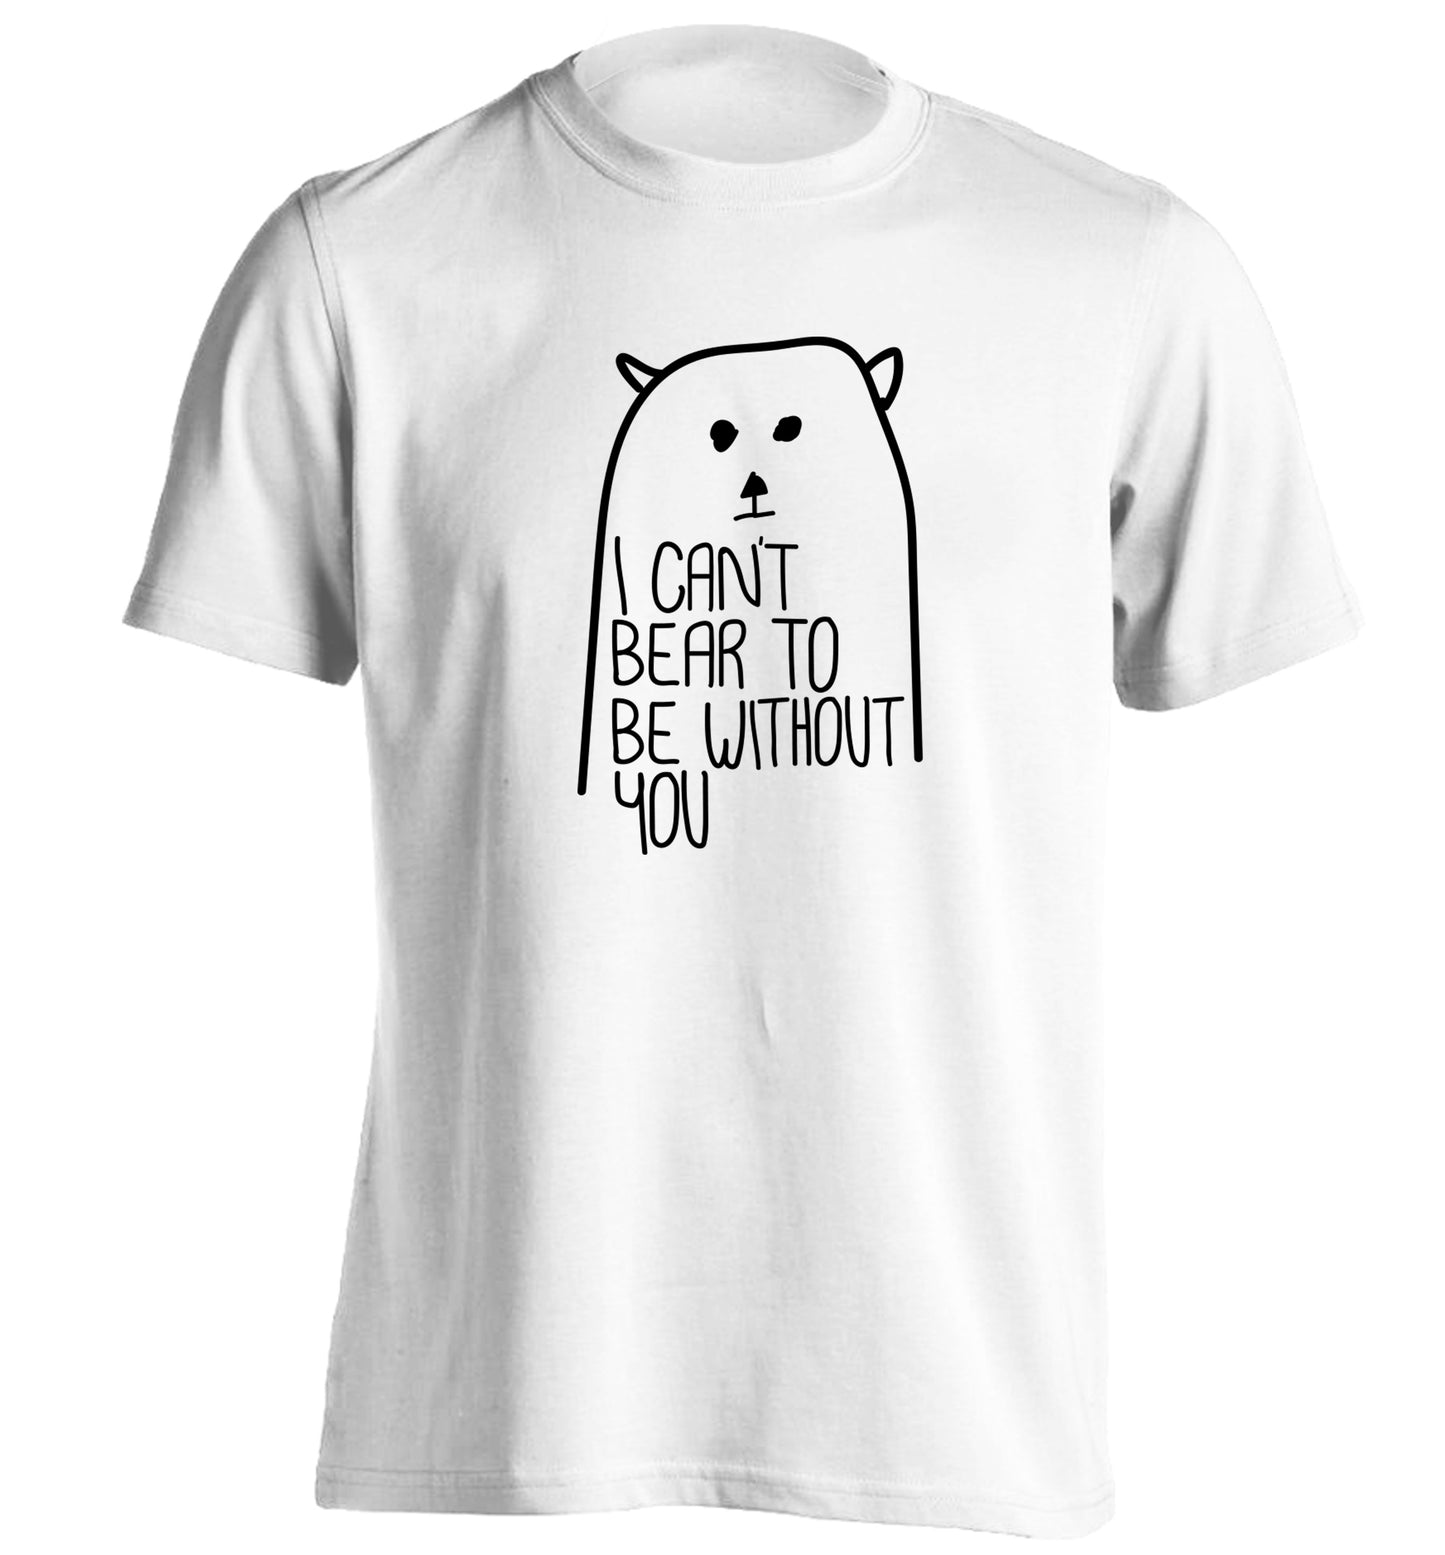 I can't bear to be without you adults unisex white Tshirt 2XL